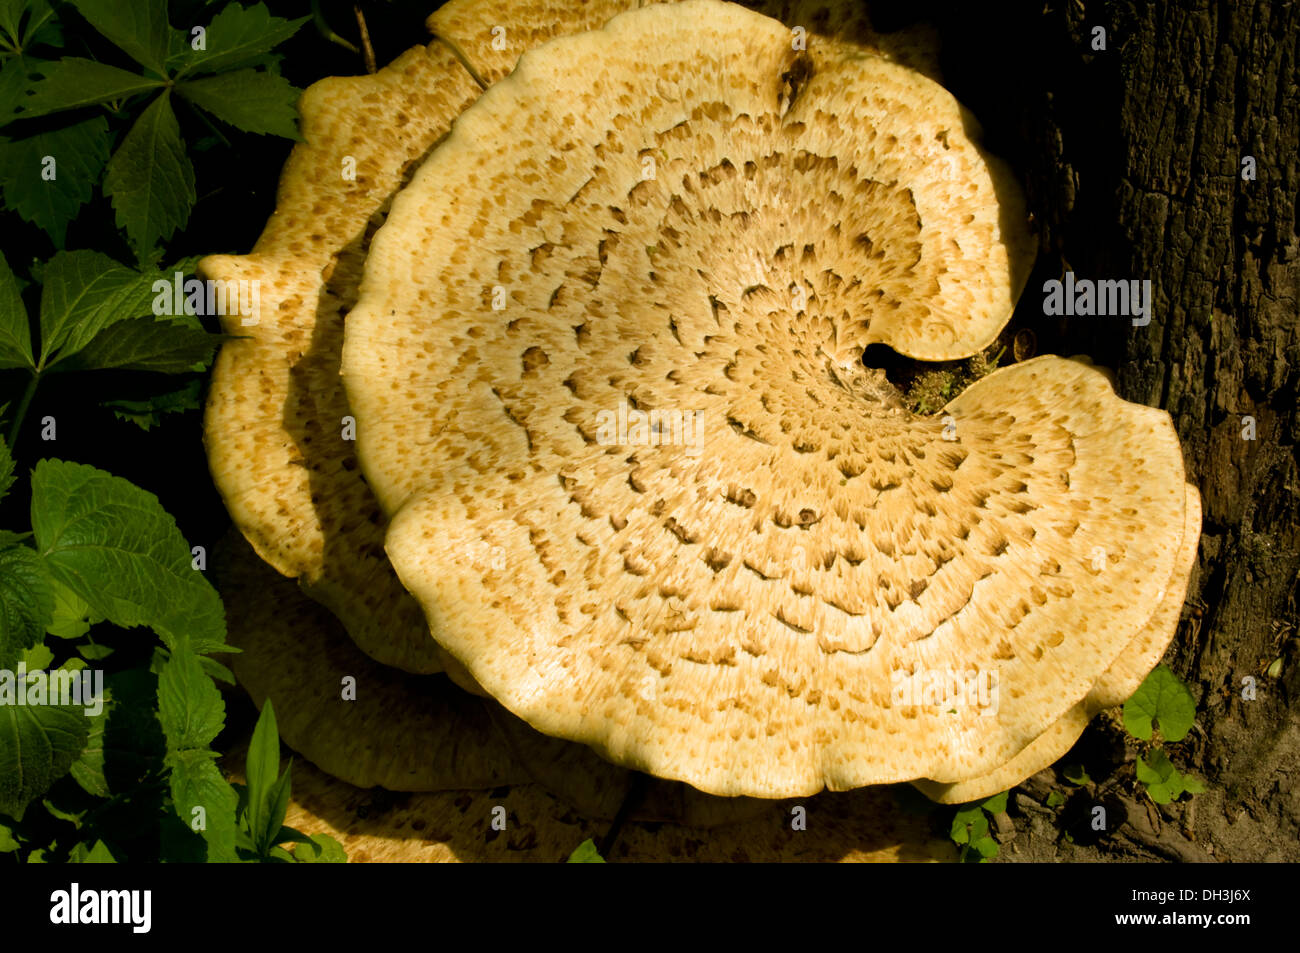 Close-up of tree fungi growing on a dead tree stump. Stock Photo